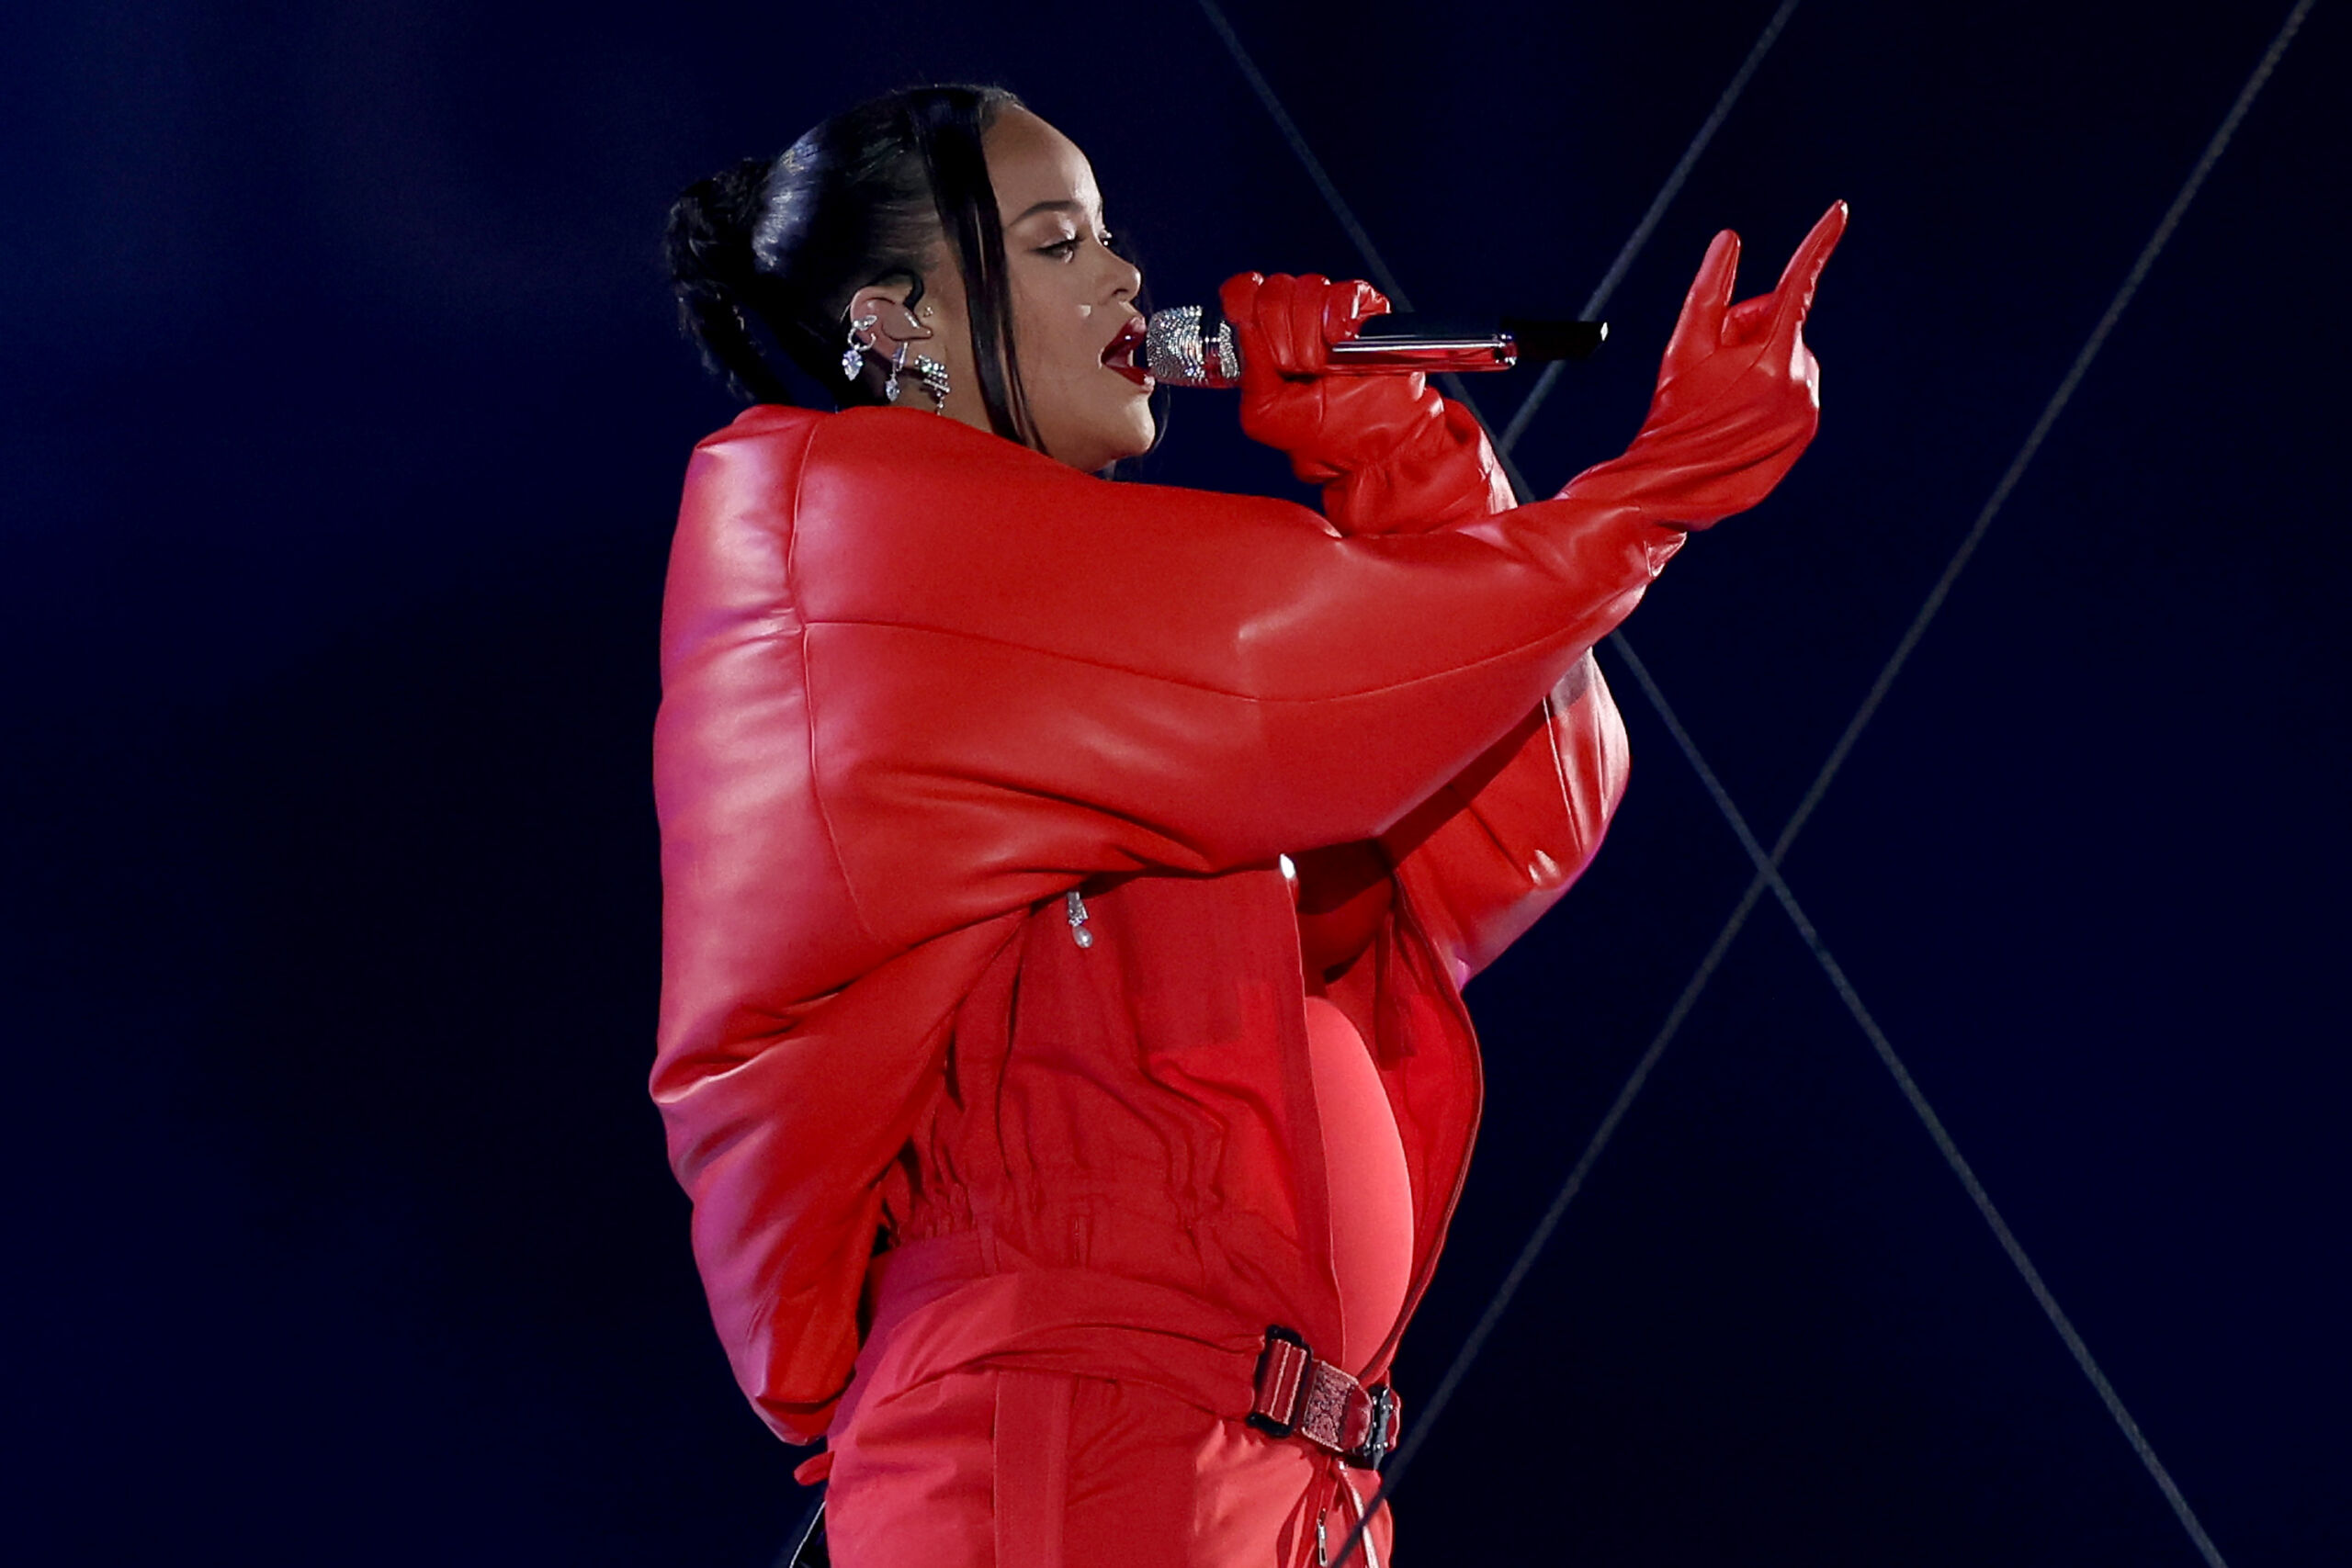  / GLENDALE, ARIZONA - FEBRUARY 12: Rihanna performs onstage during the Apple Music Super Bowl LVII Halftime Show at State Farm Stadium on February 12, 2023 in Glendale, Arizona. (Photo by Ezra Shaw/Getty Images)